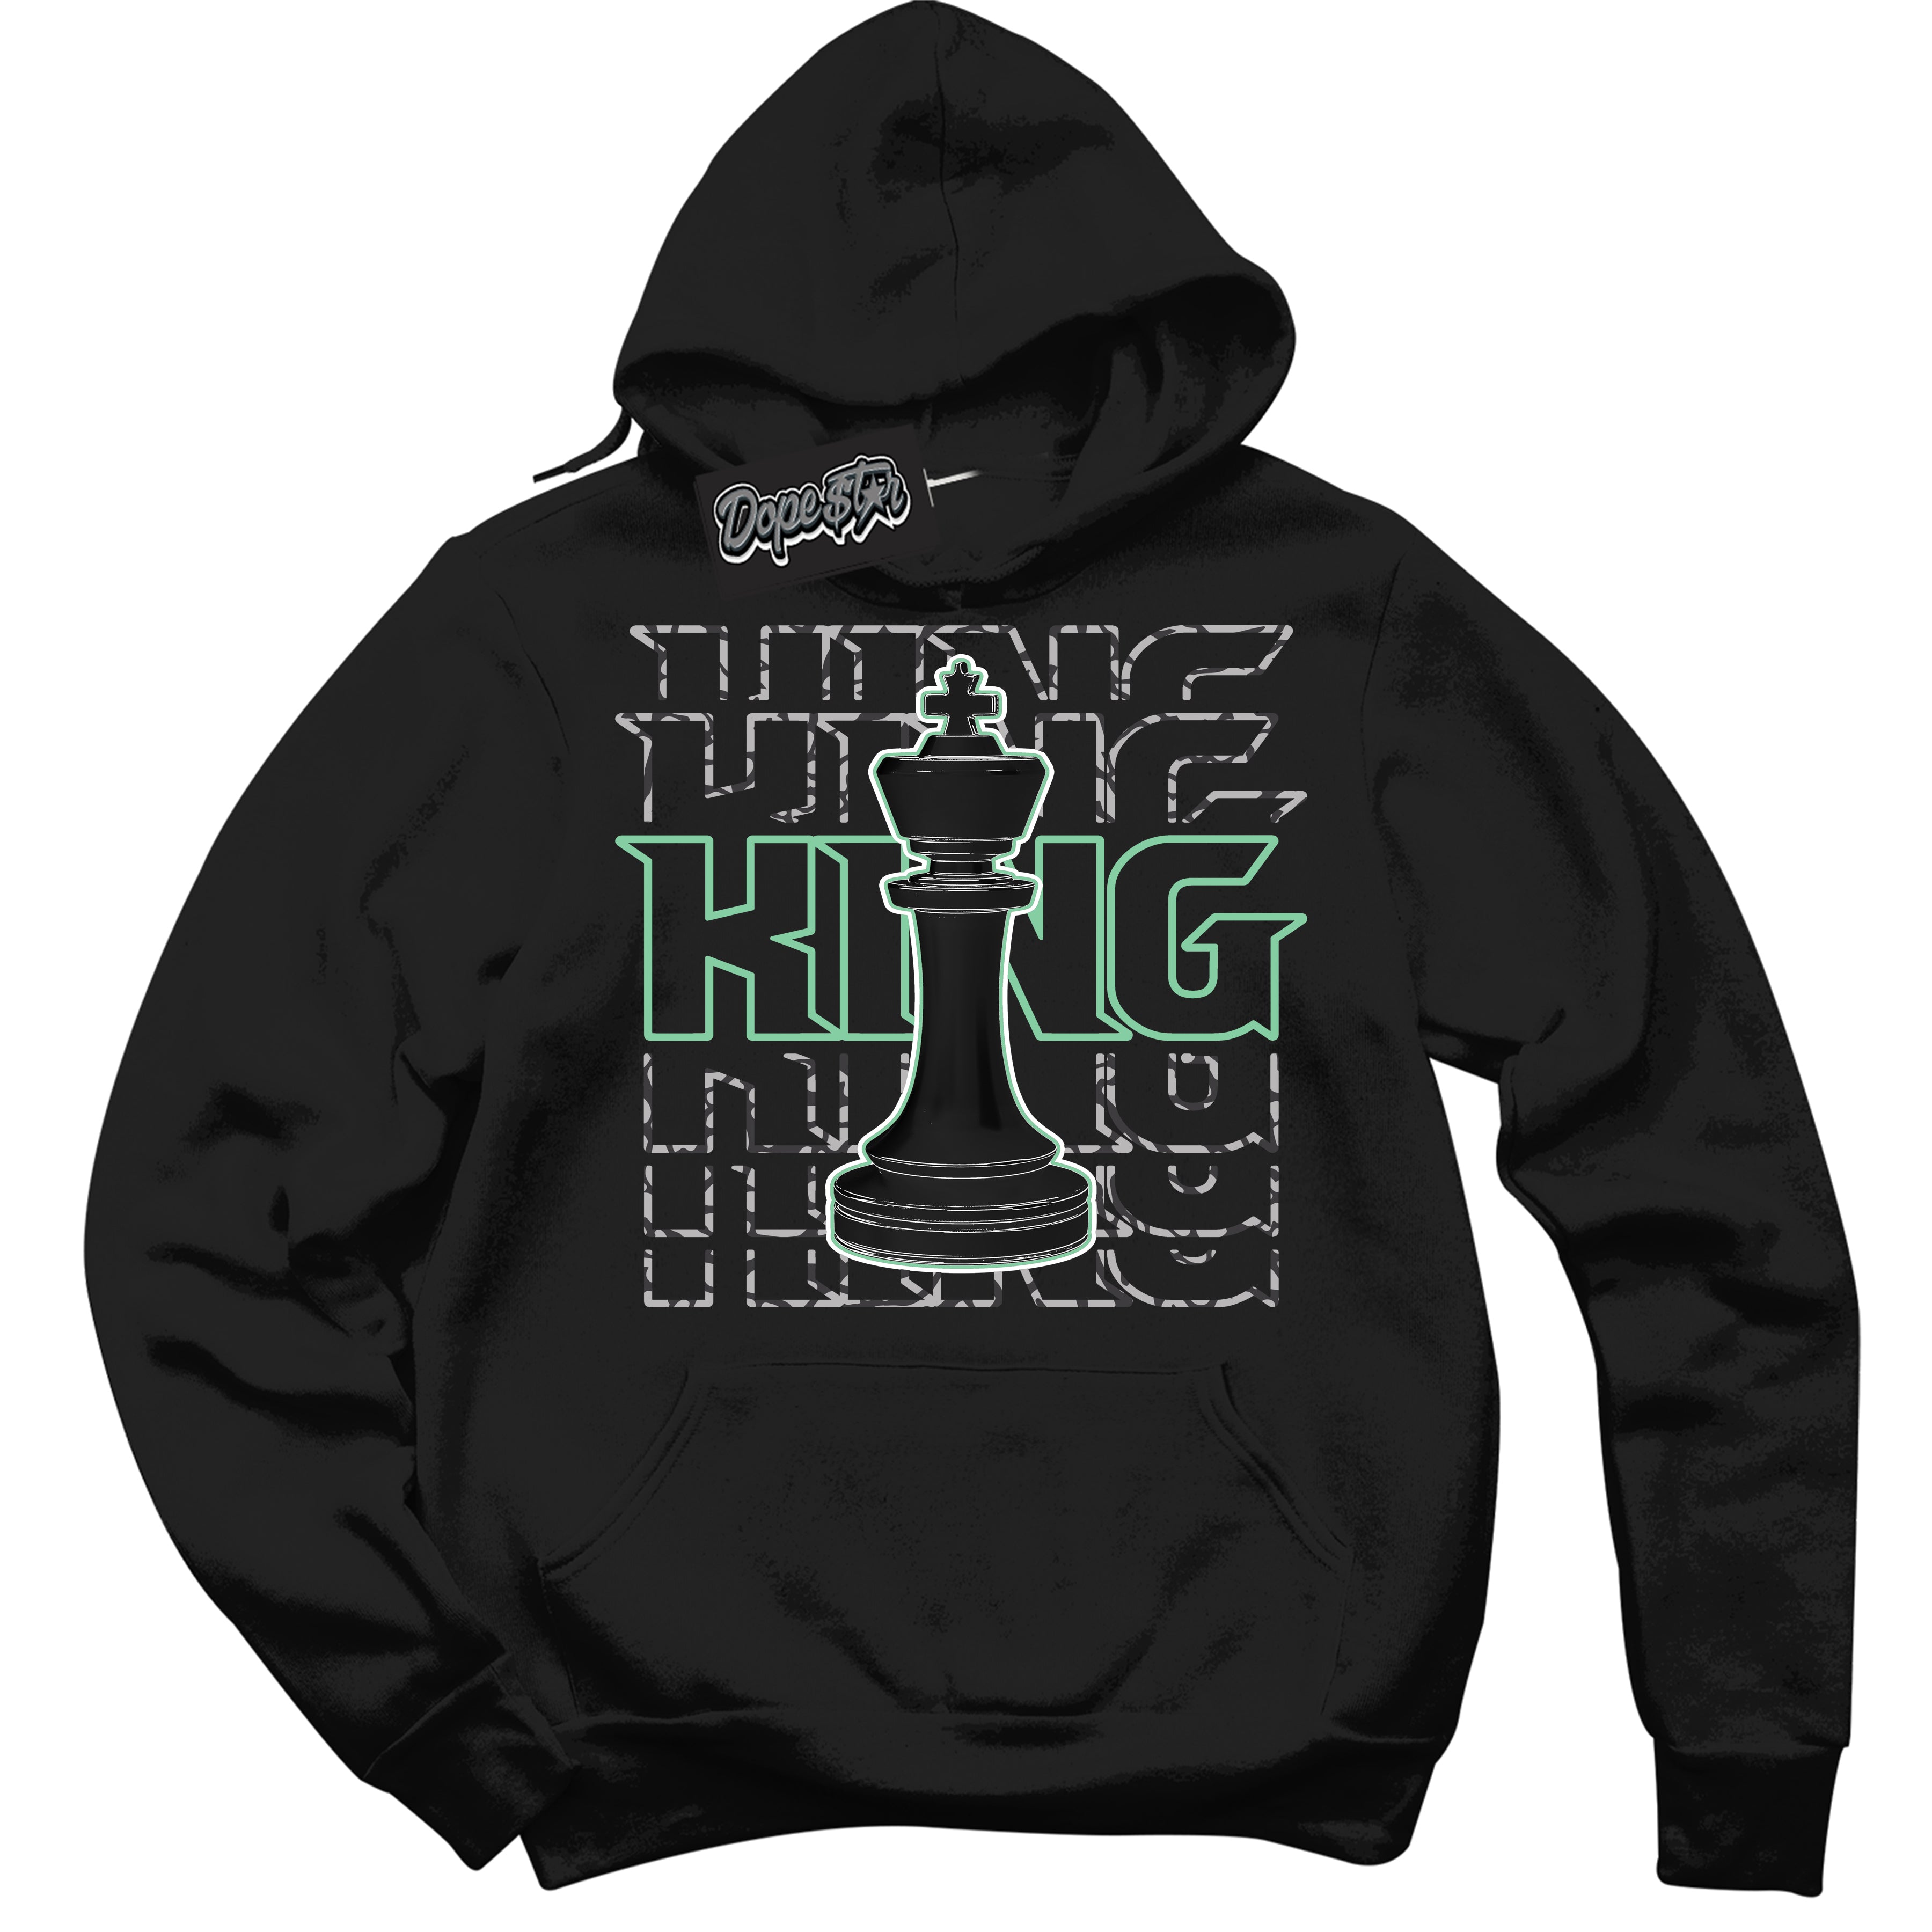 Cool Black Graphic DopeStar Hoodie with “ King Chess “ print, that perfectly matches Green Glow 3S sneakers